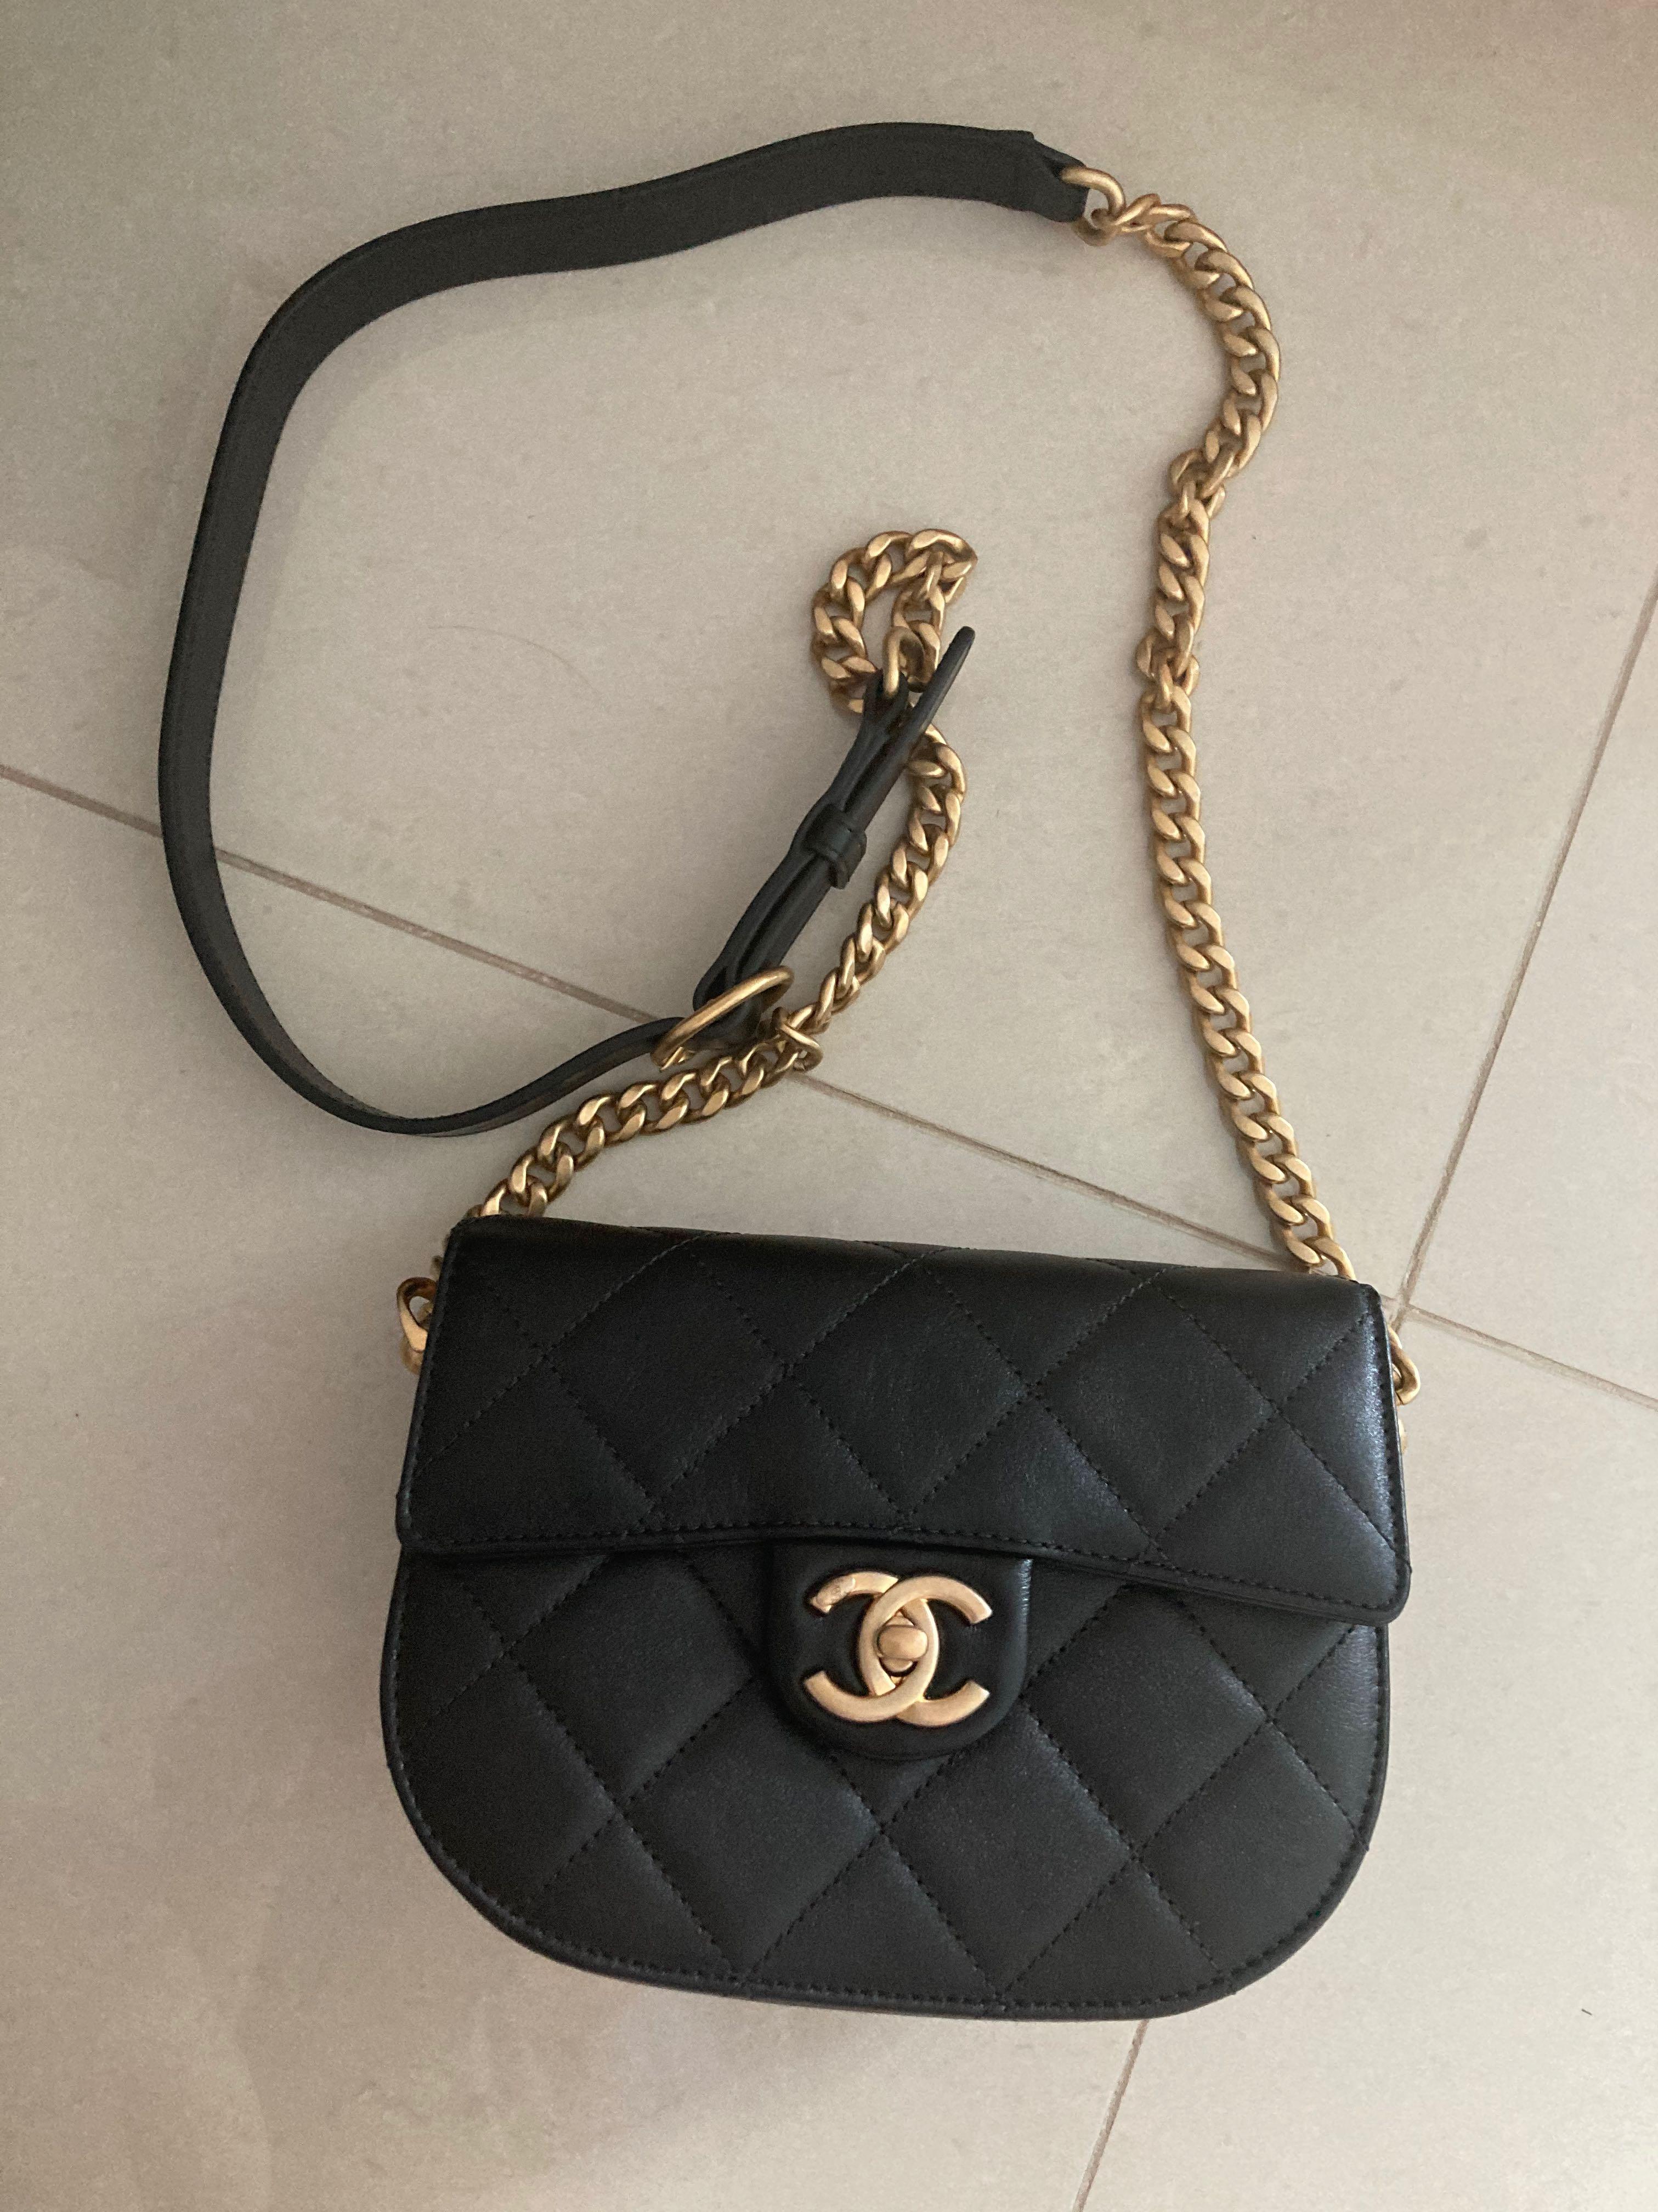 CHANEL Small Chain Shoulder Bag Clutch Black Quilted Flap Lambskin d22   hannarishop